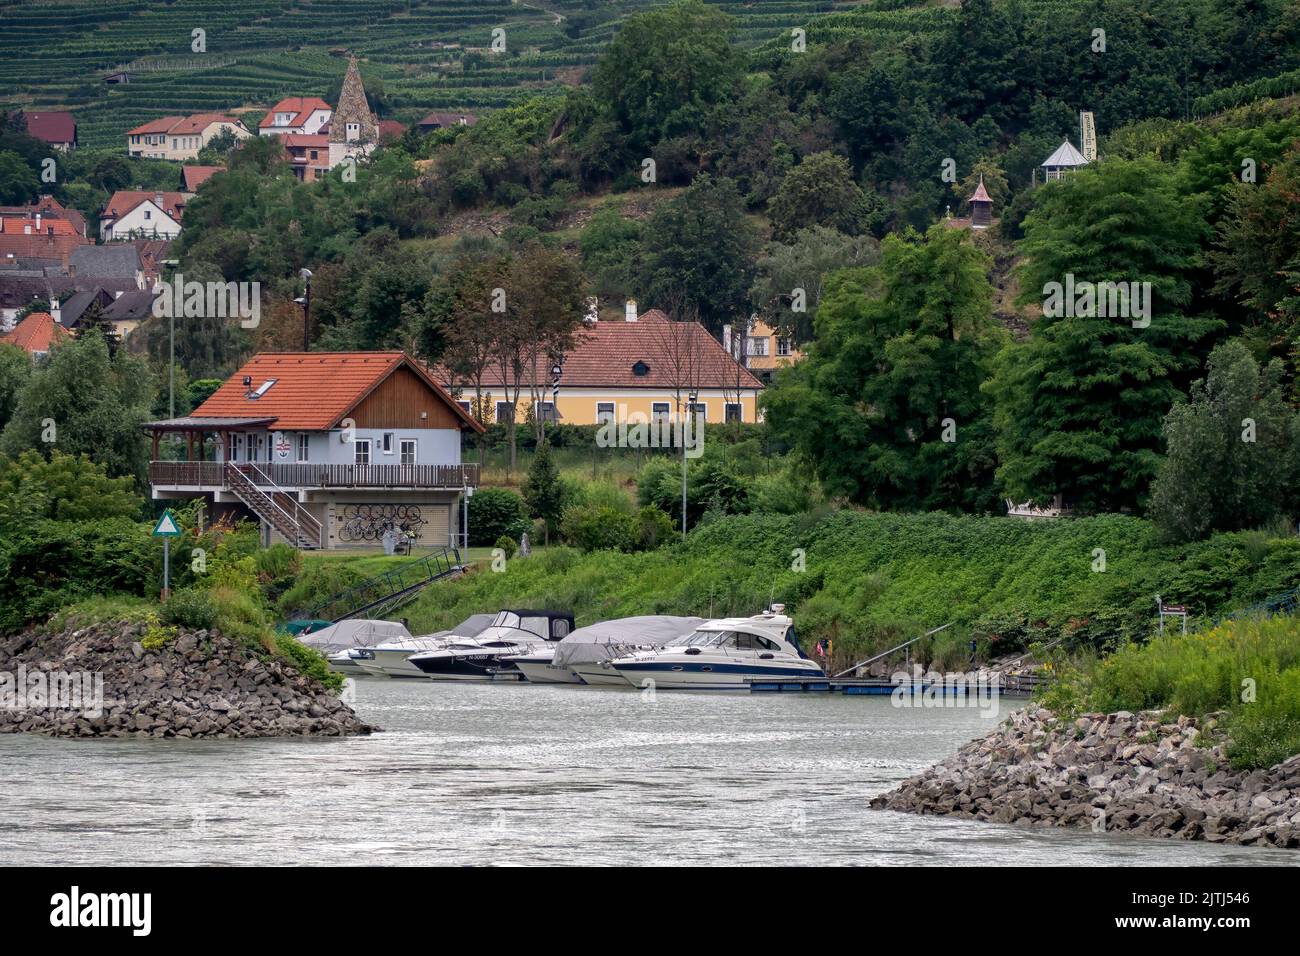 SPITZ, AUSTRIA - JULY 13, 2019:  The Spitz Water Sports Club on the River Danube  with the village in the background Stock Photo